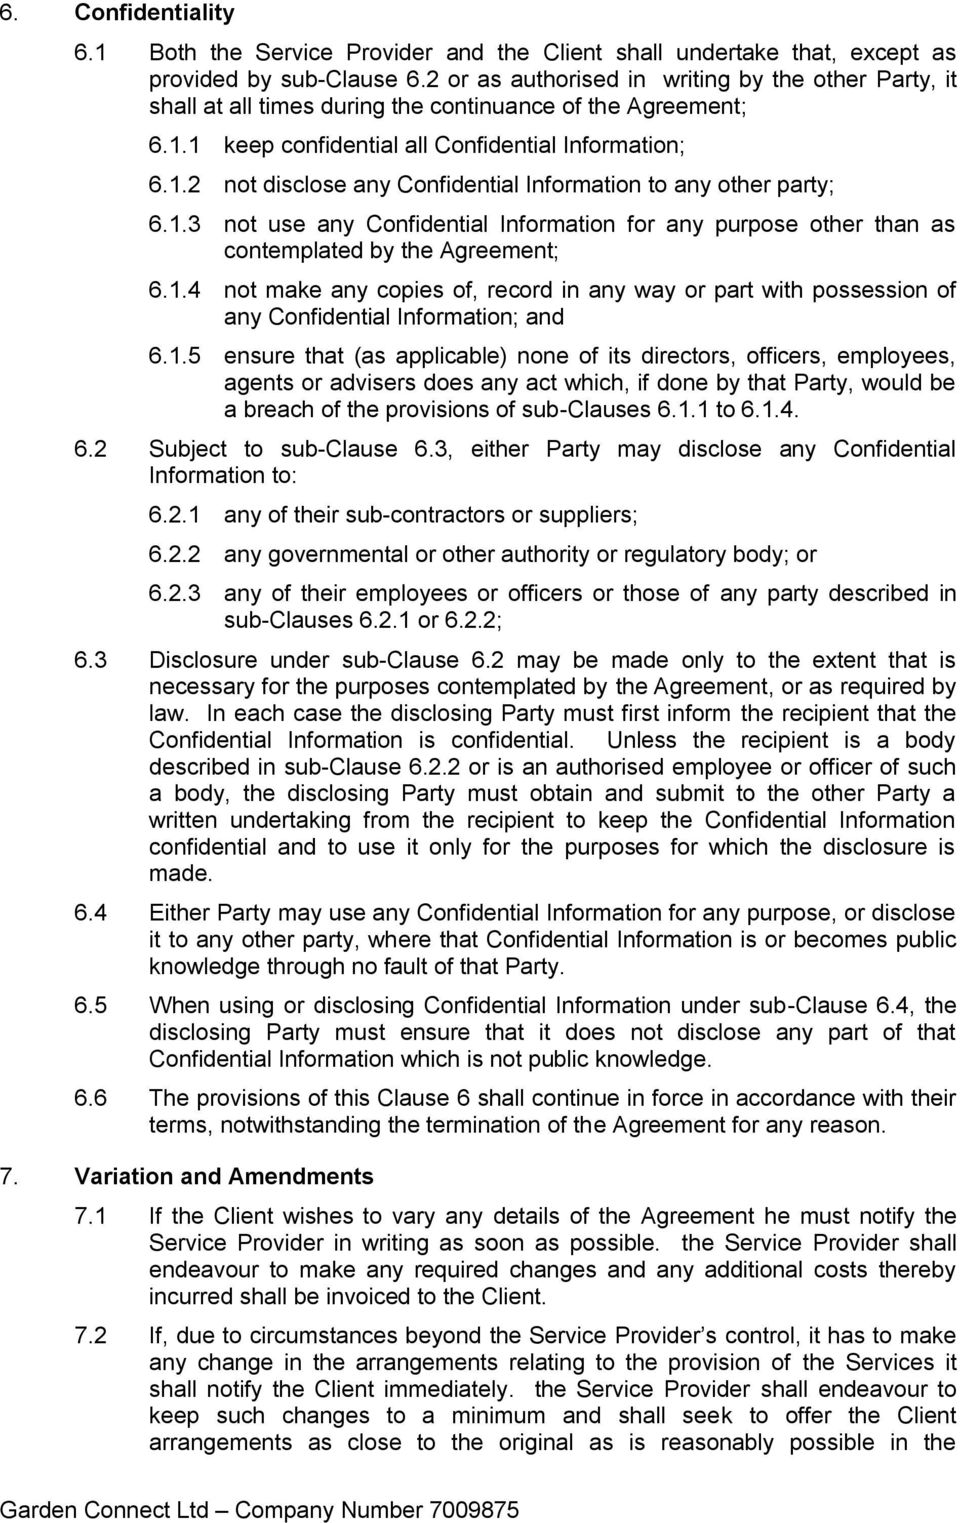 1.3 not use any Confidential Information for any purpose other than as contemplated by the Agreement; 6.1.4 not make any copies of, record in any way or part with possession of any Confidential Information; and 6.